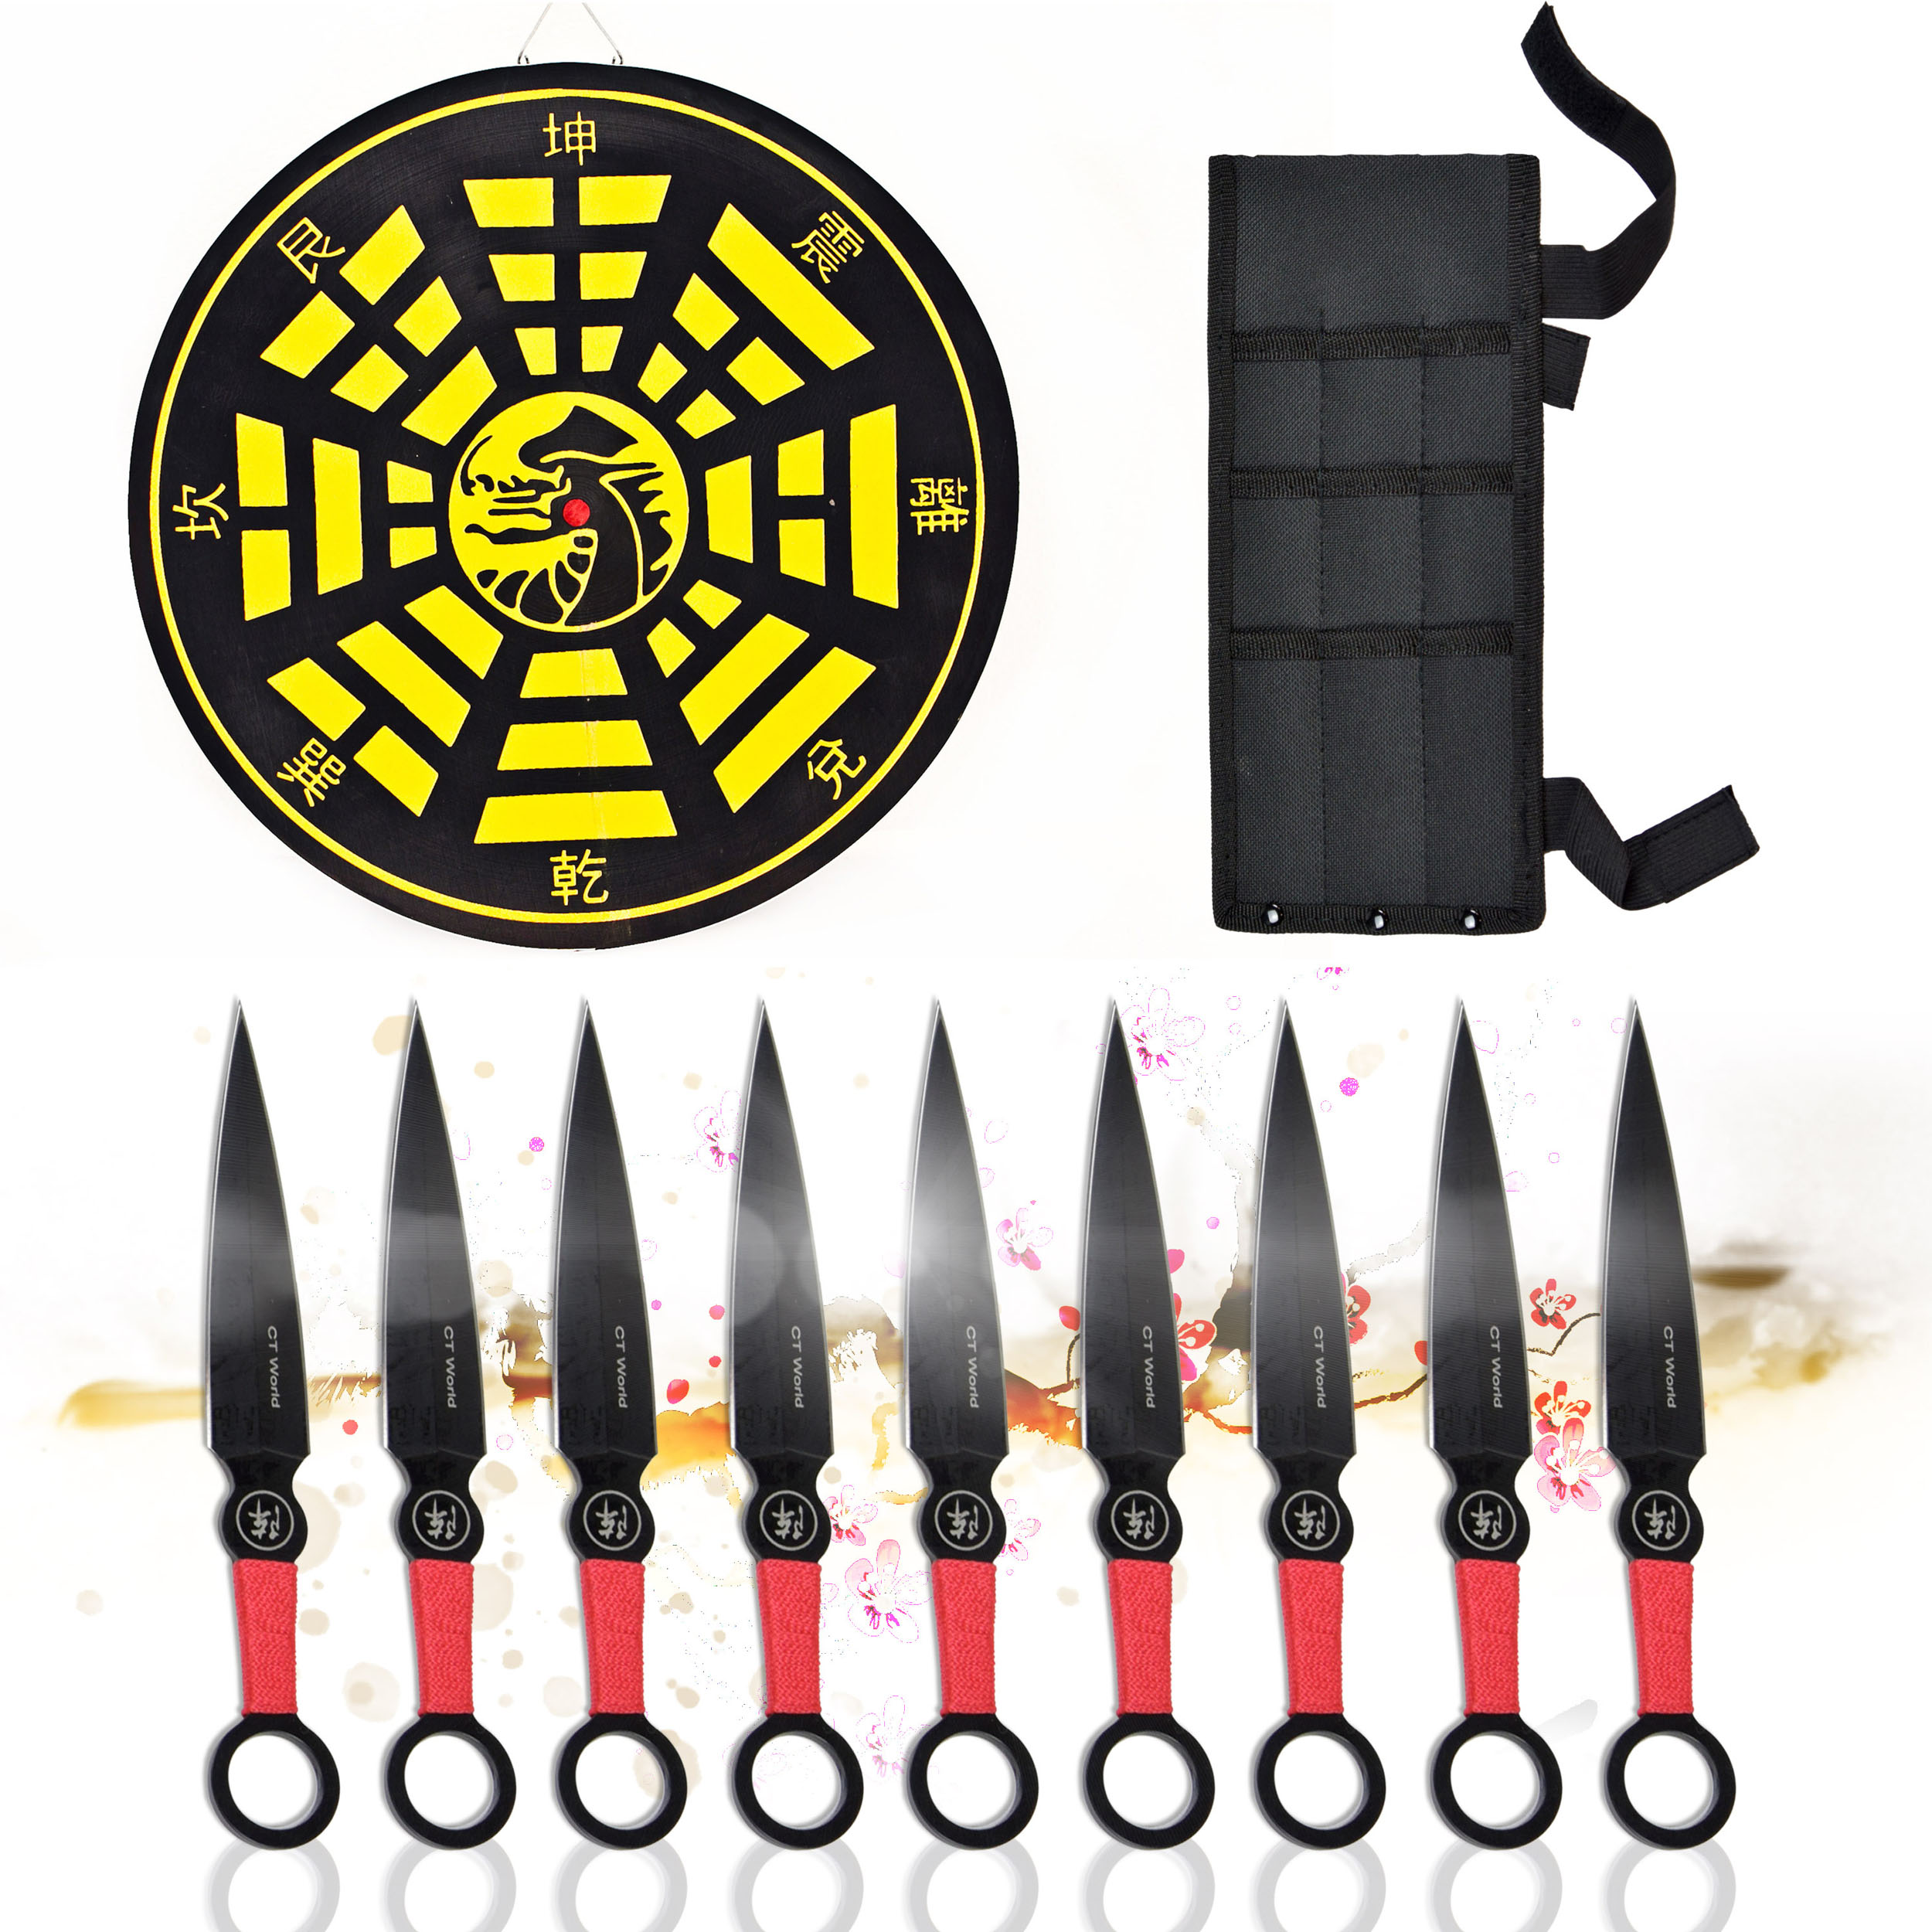 9-piece throwing knife set with target